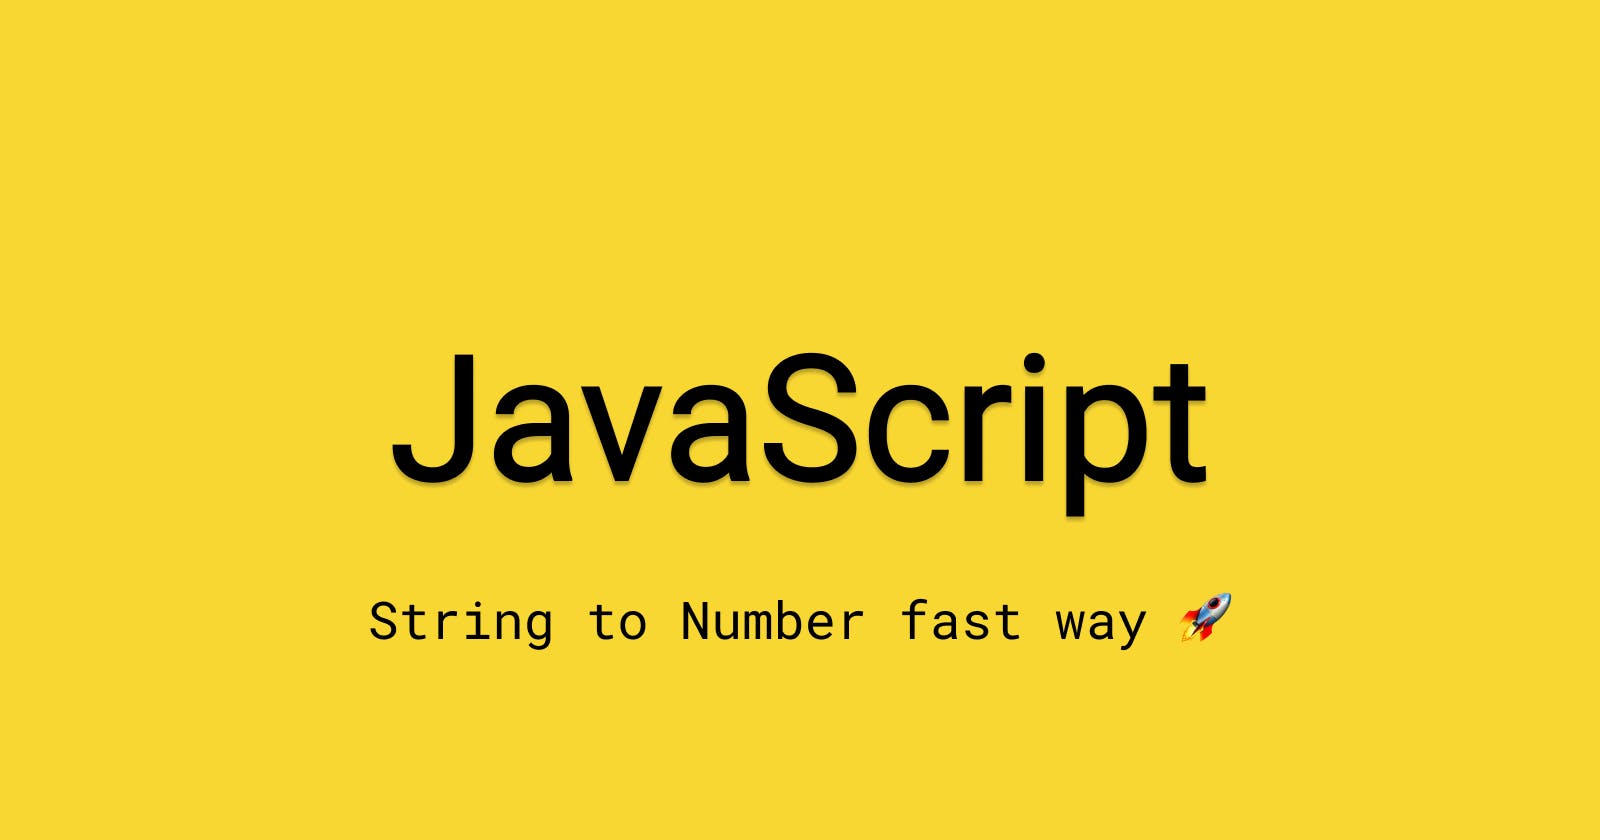 JavaScript - String to Number fast way